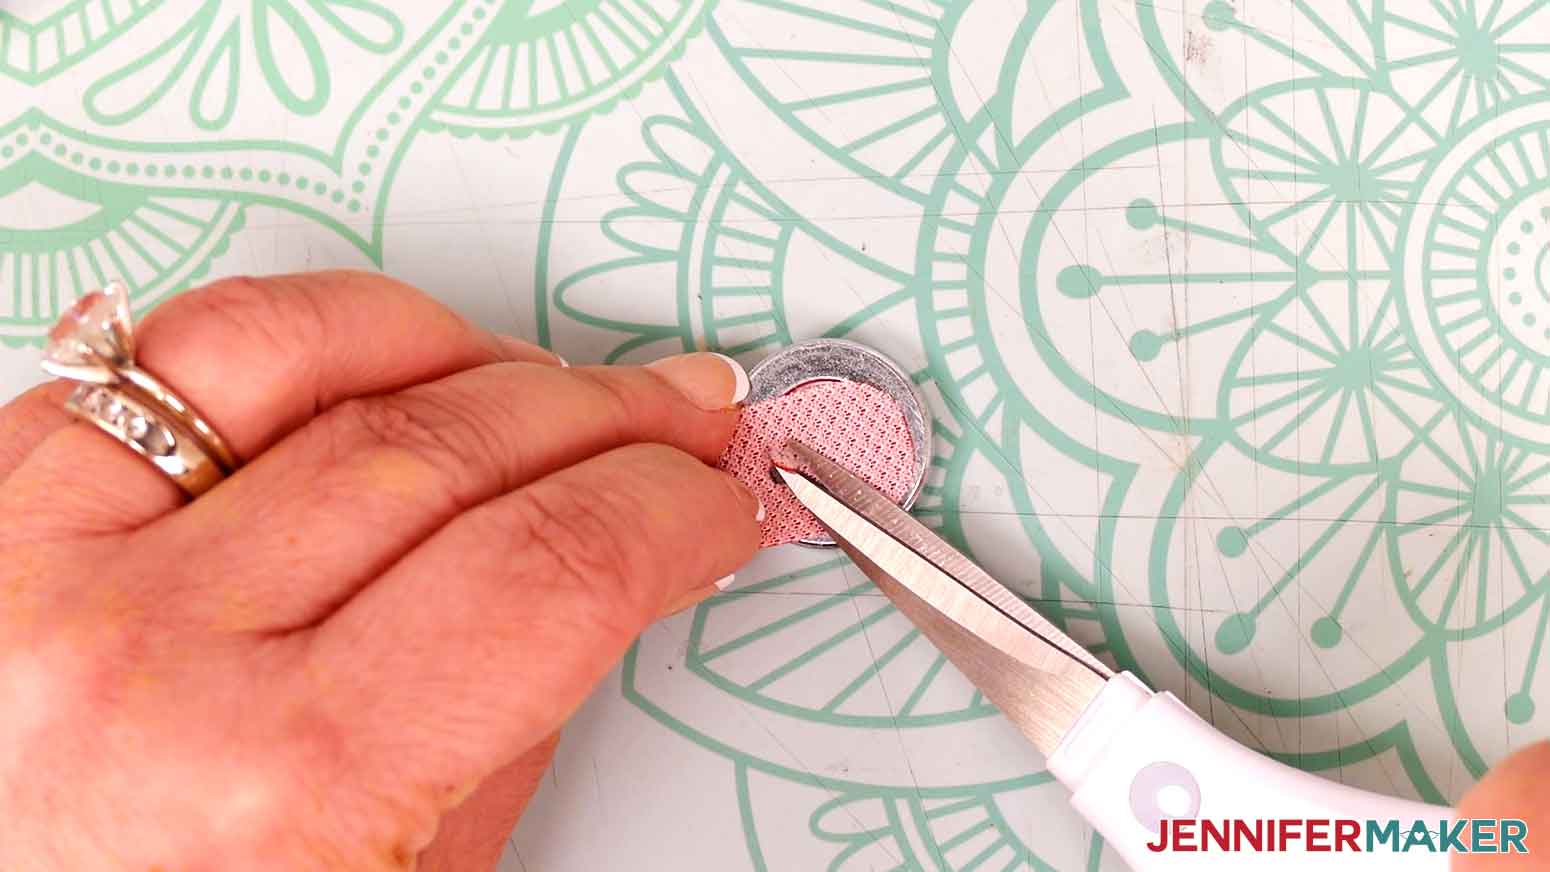 Use scissors to trim any threads that are keeping the hole attached.